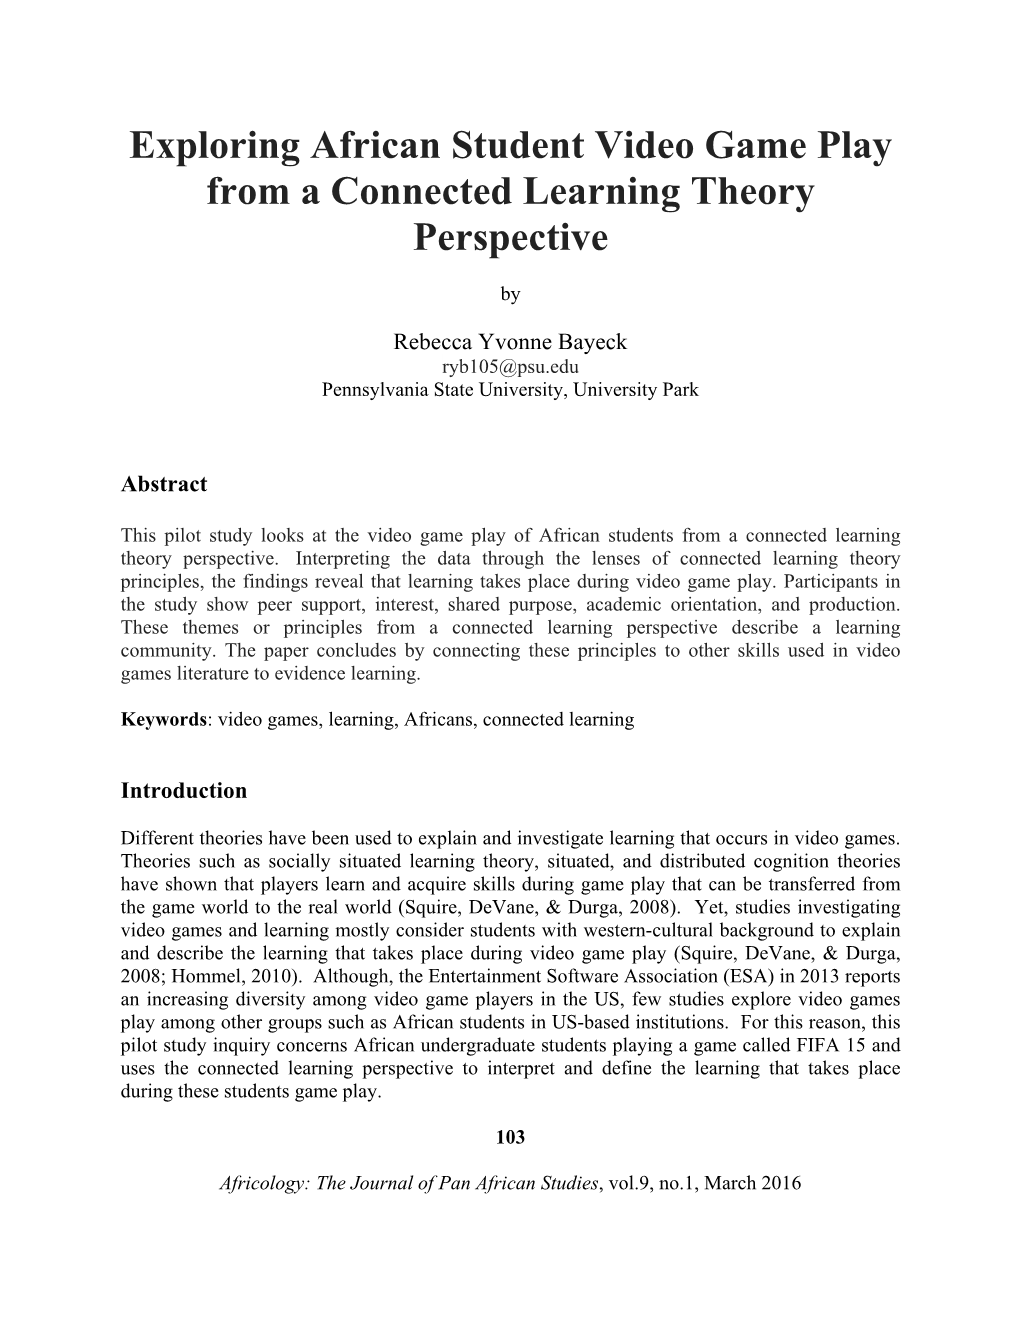 Exploring African Student Video Game Play from a Connected Learning Theory Perspective